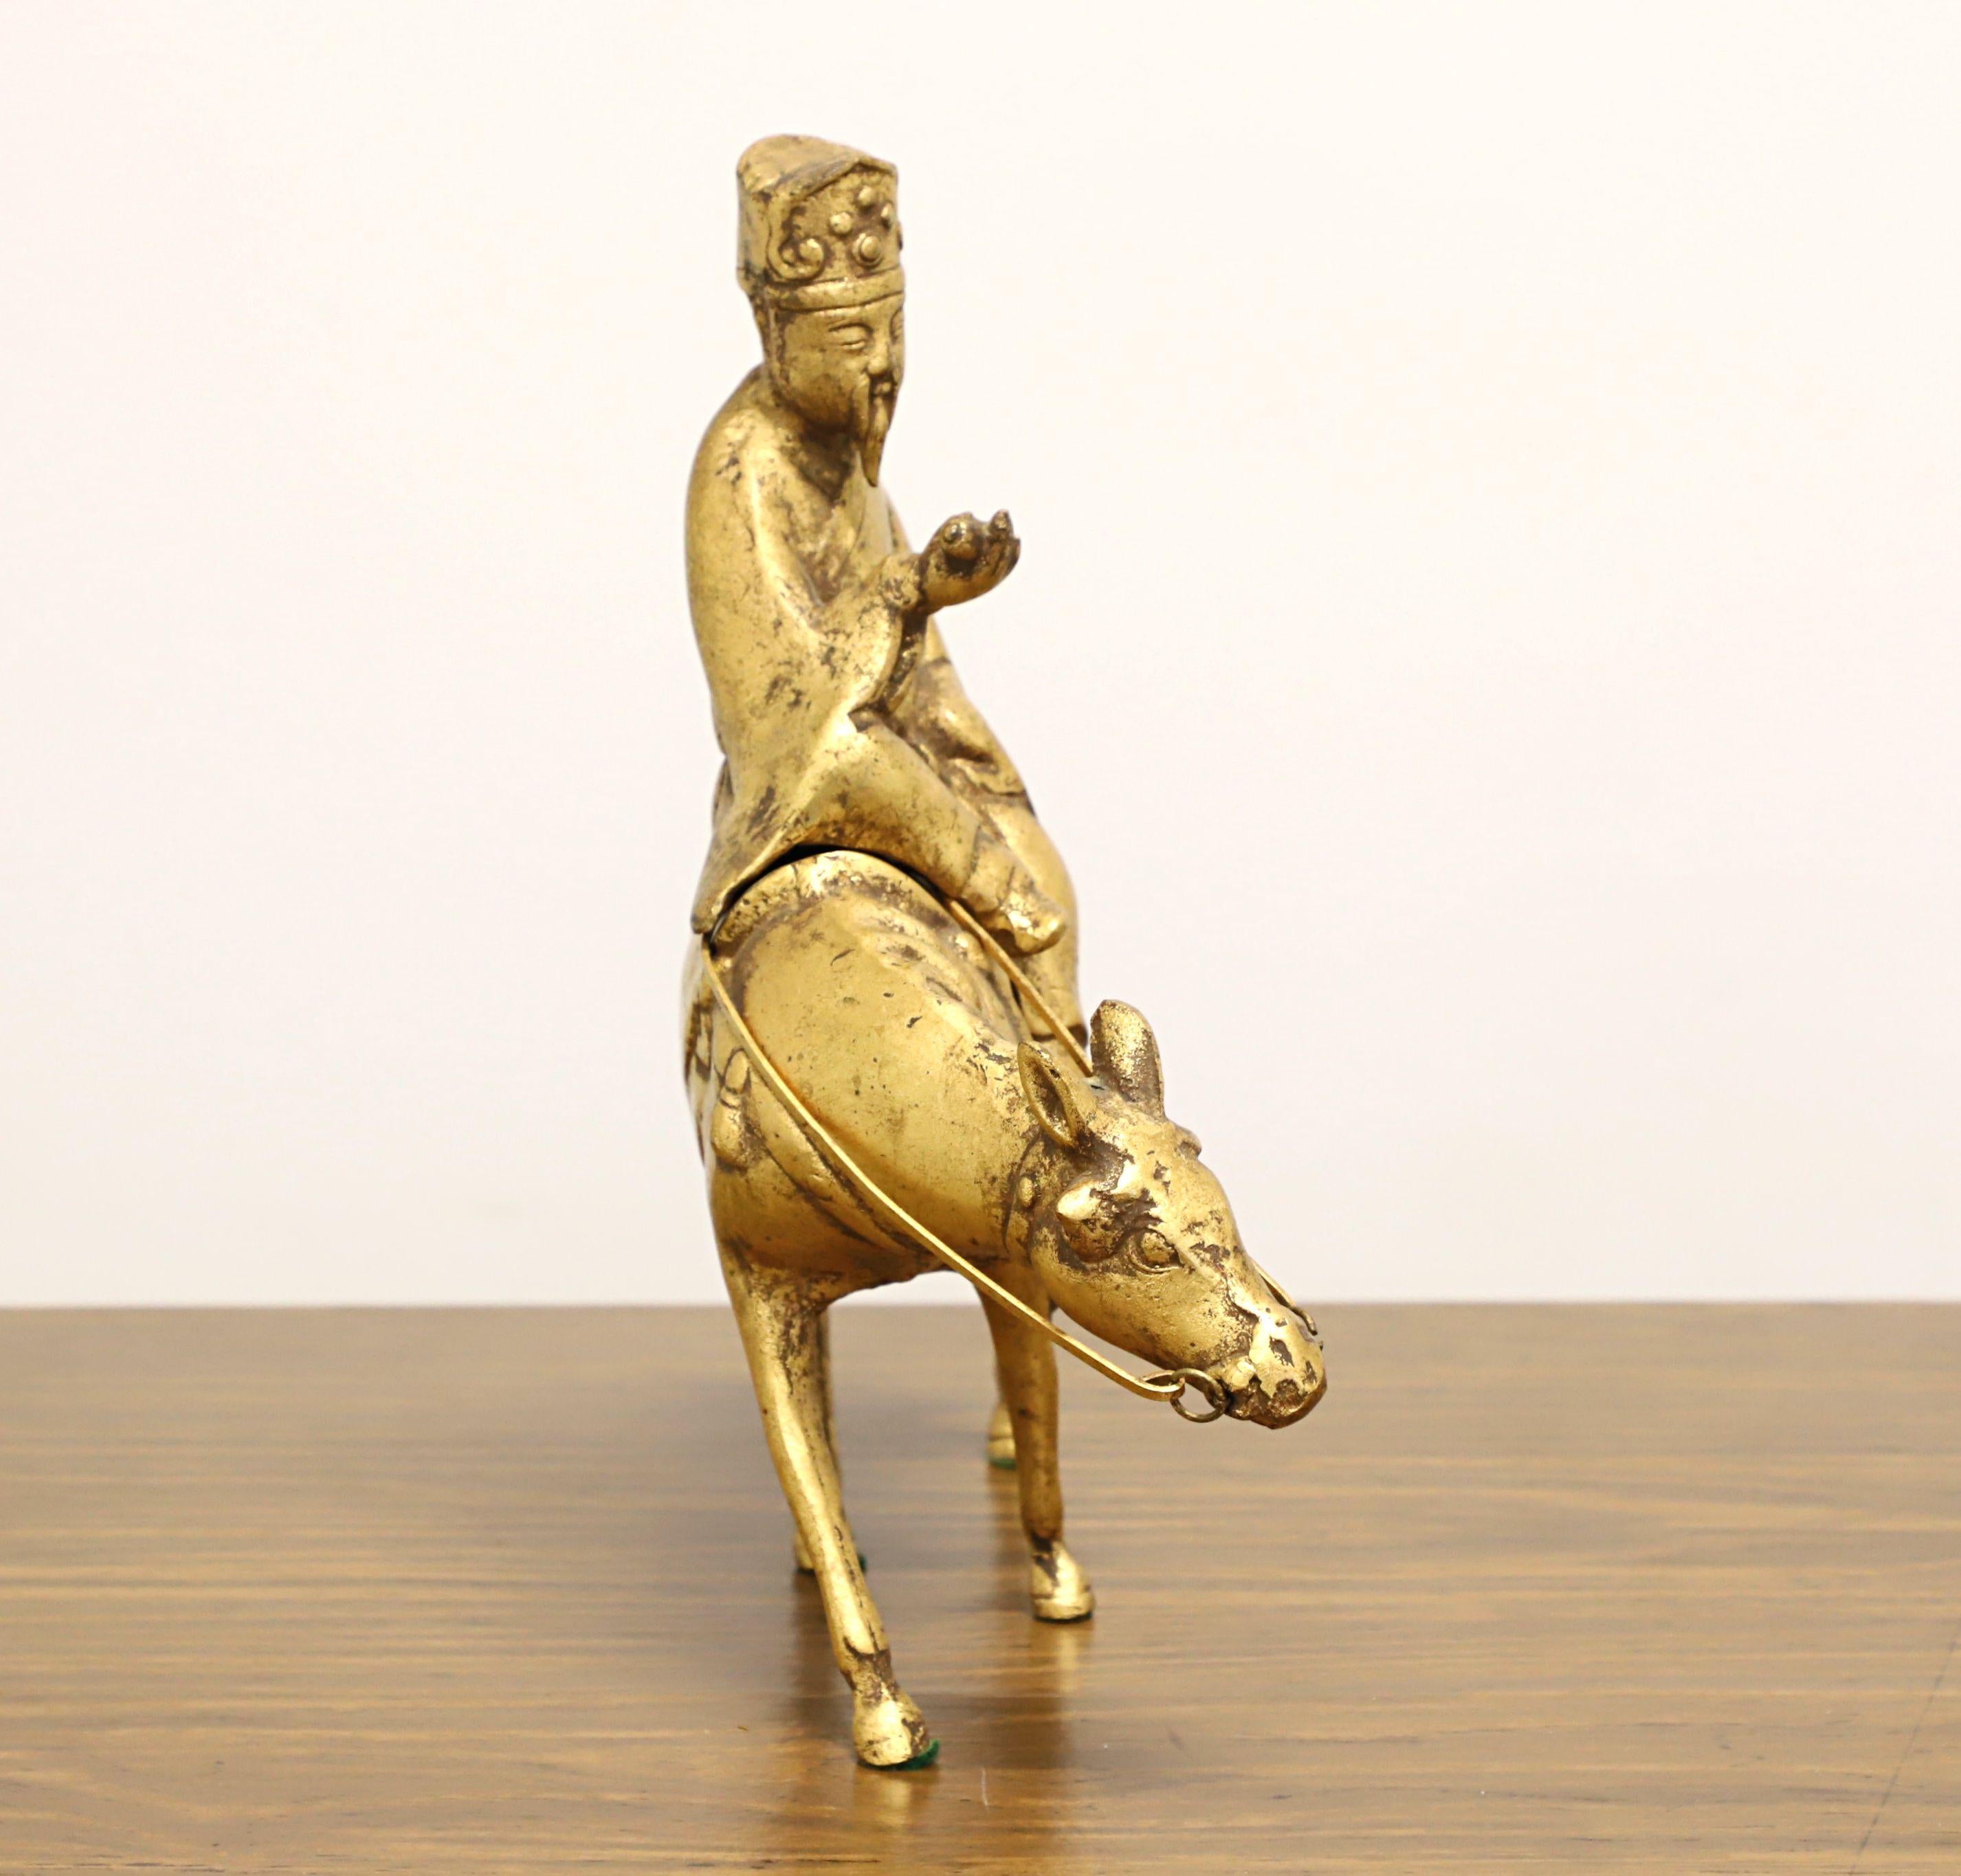 A vintage Chinese table top incense burner sculpted in bronze depicting a scholar riding a horse. Unsigned, artist unknown. Solid bronze of two pieces with a bronze and gold tint. Scholar removes from horse for incense placement. Likely made in